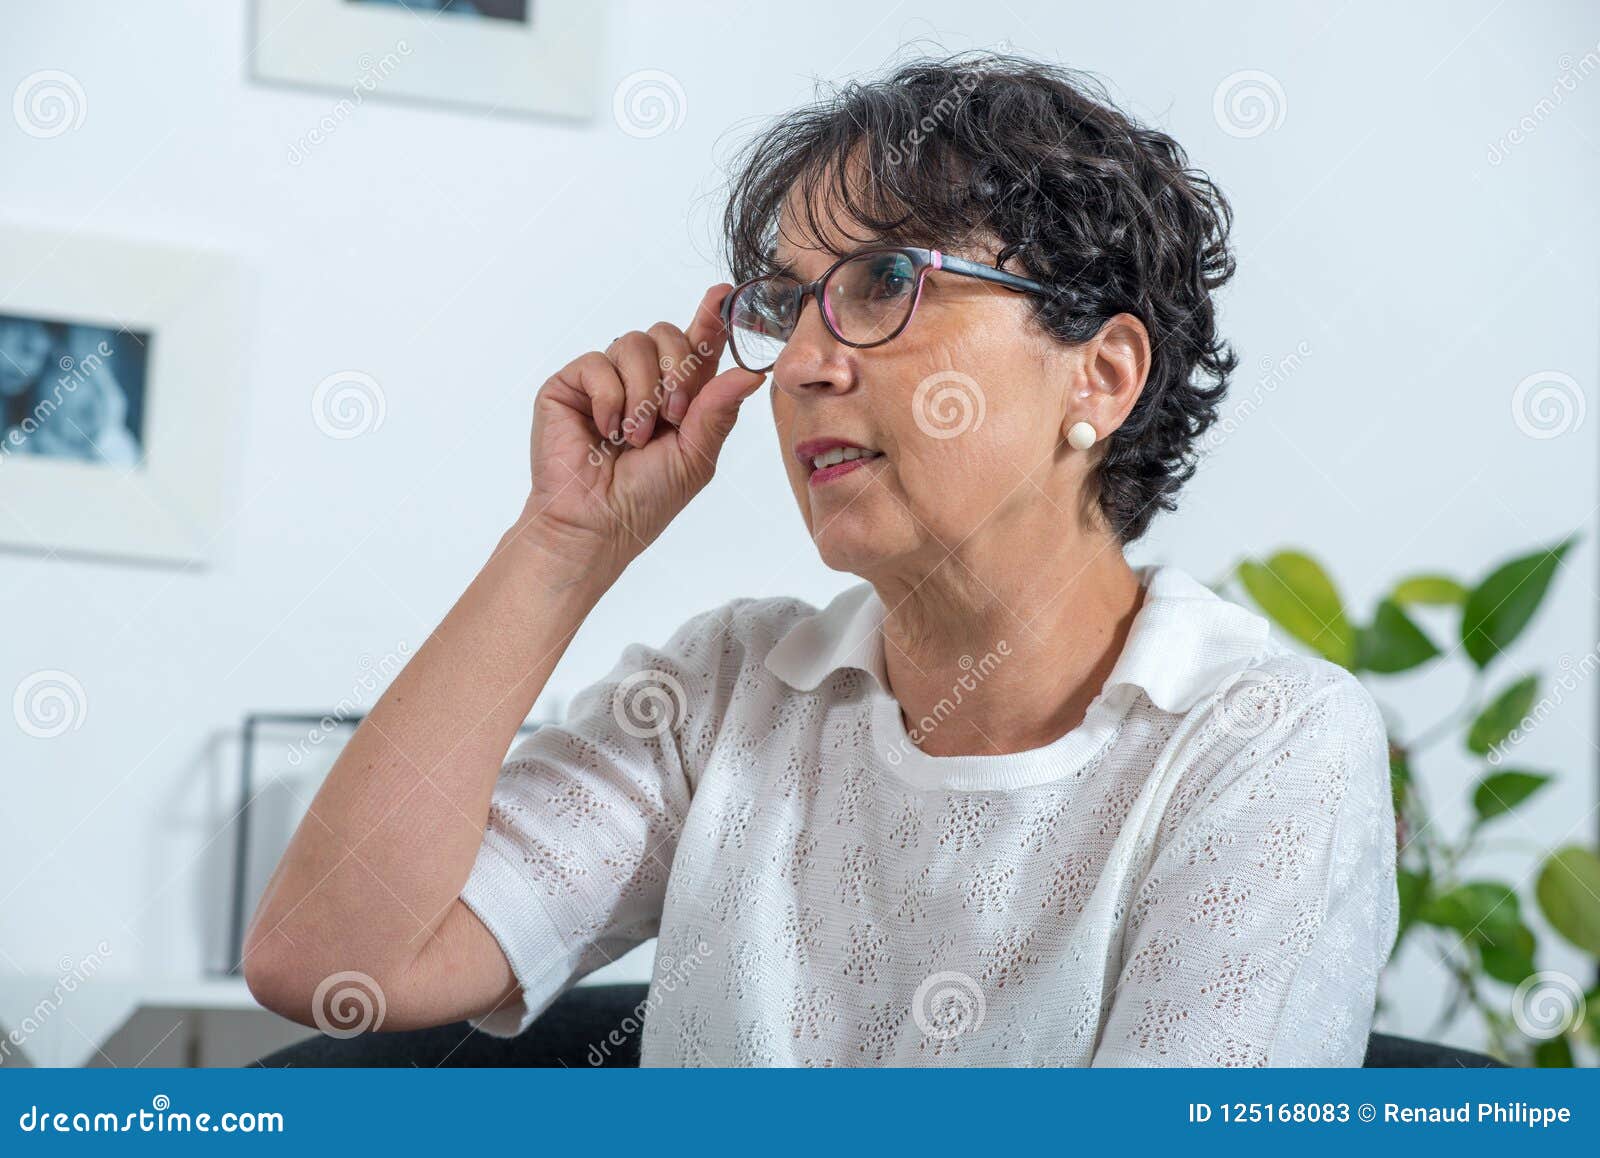 Portrait Of Beautiful Mature Brunette With Glasses Stock Image Image